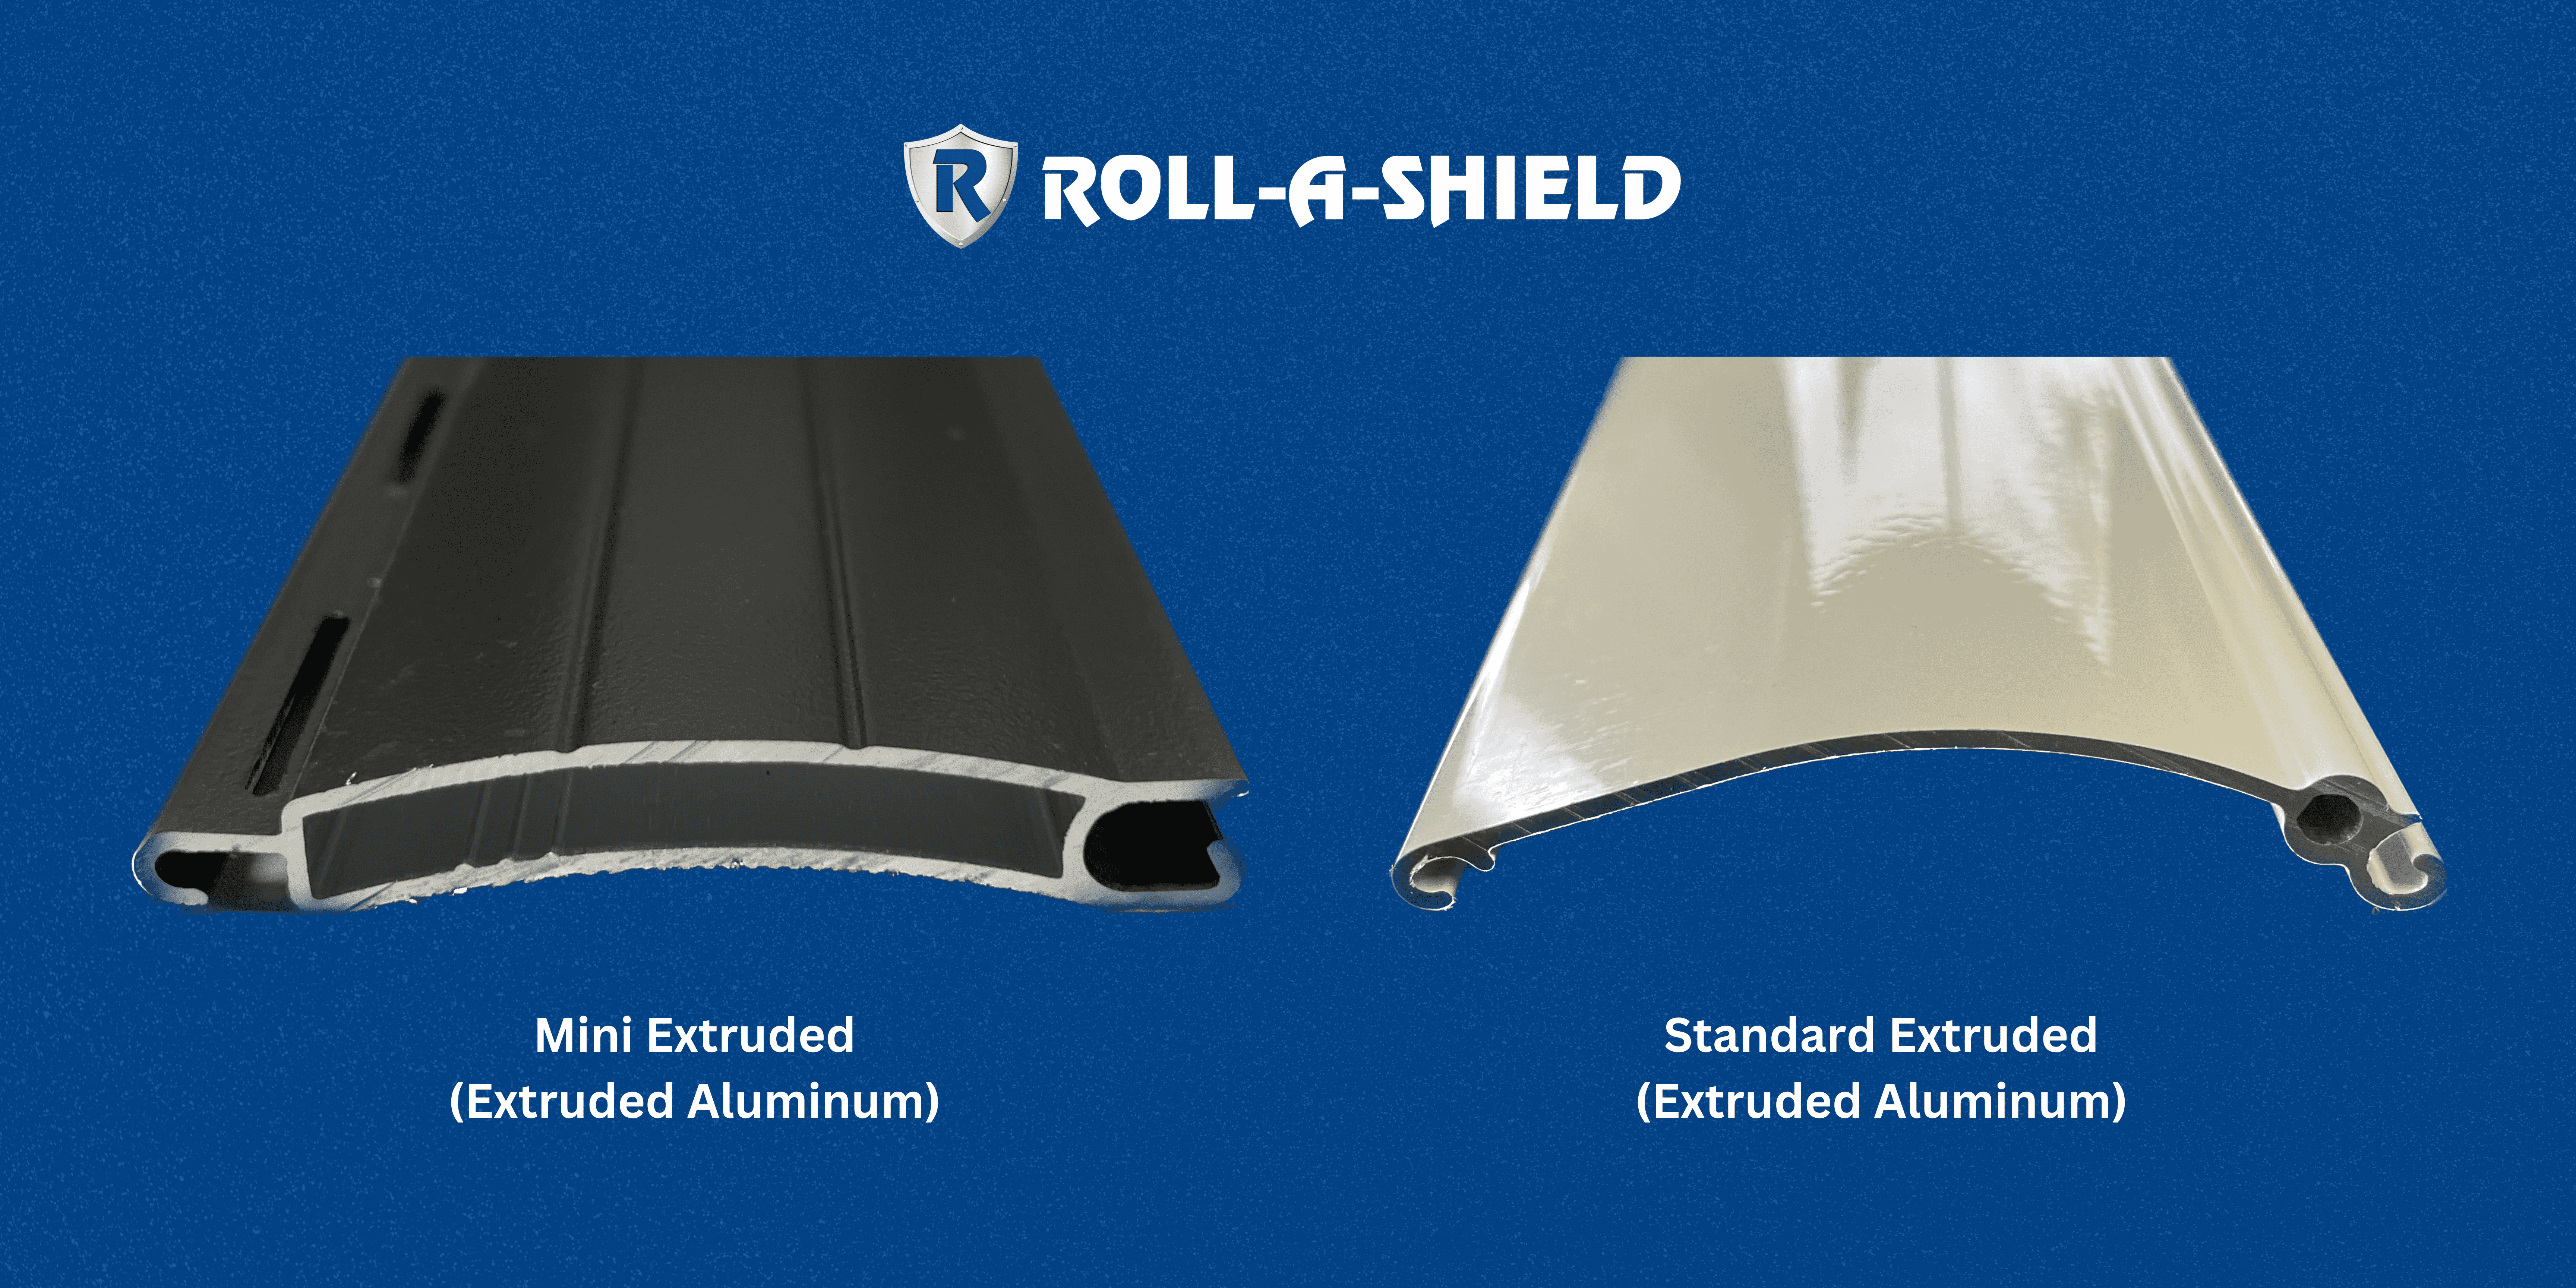 An image comparing mini extruded aluminum and standard extruded aluminum from Roll-A-Shield